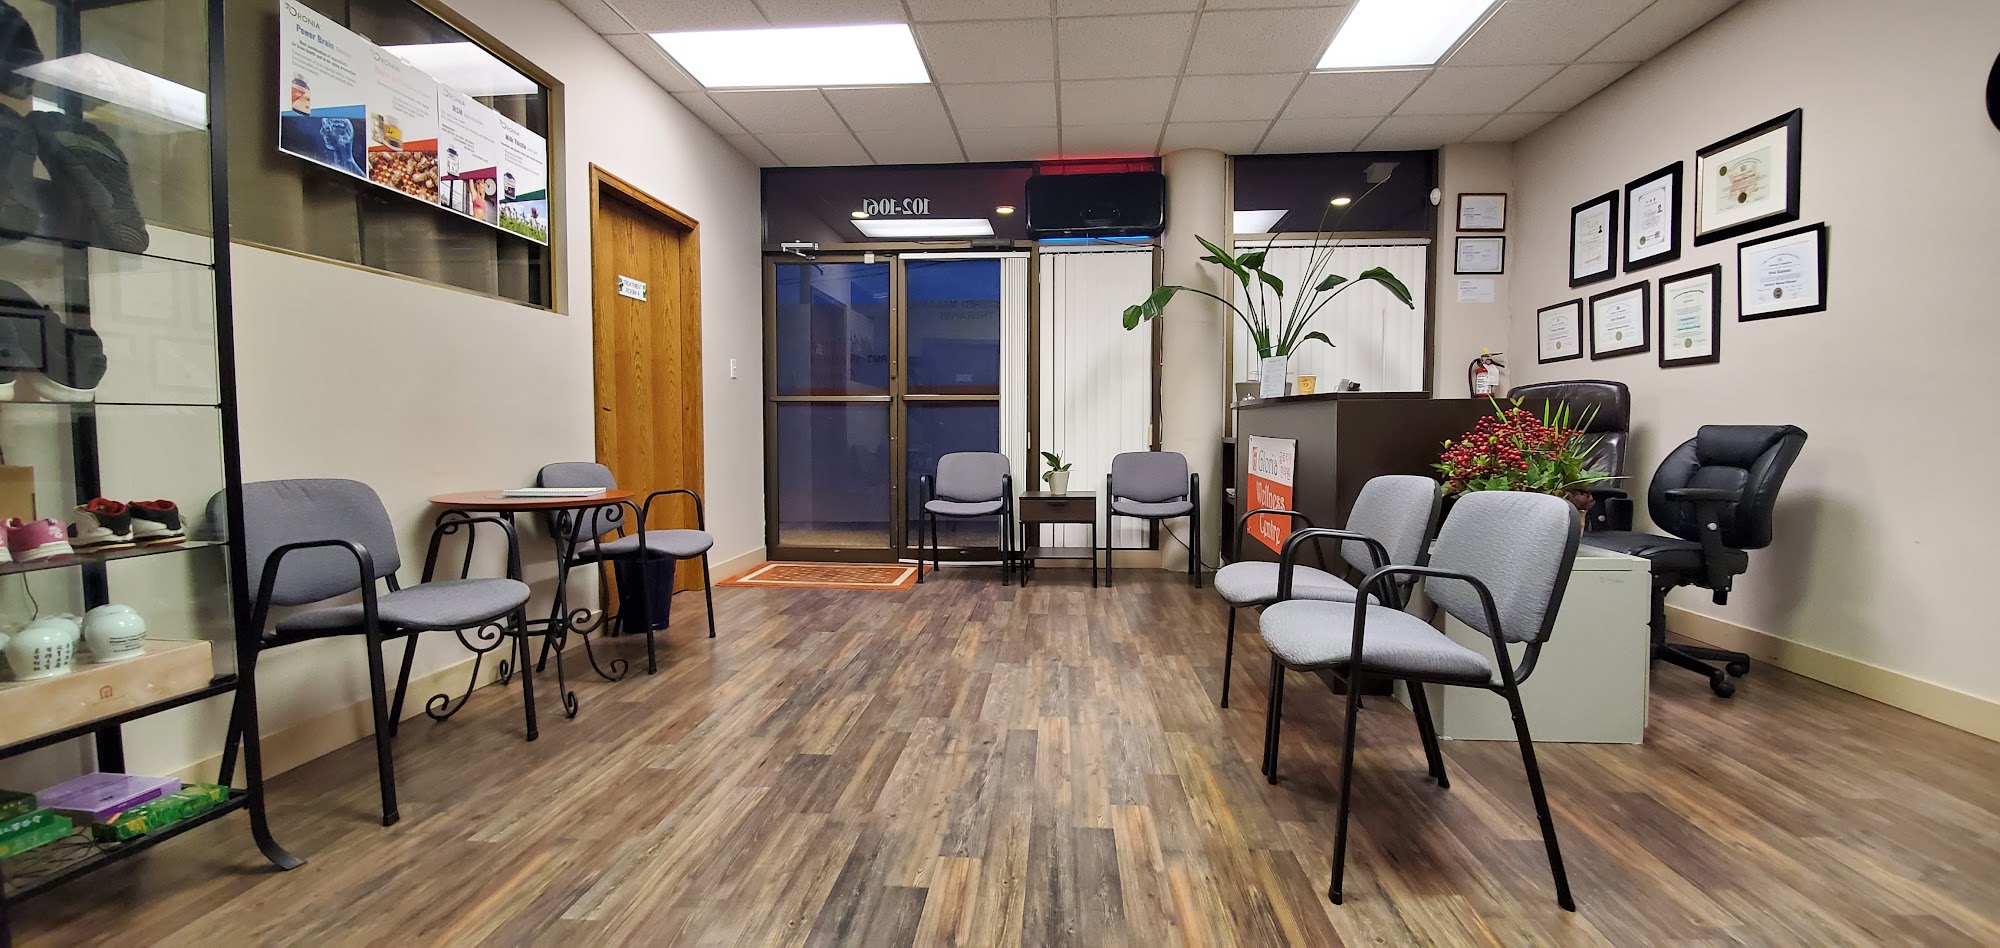 Gloria Wellness and Acupuncture Clinic